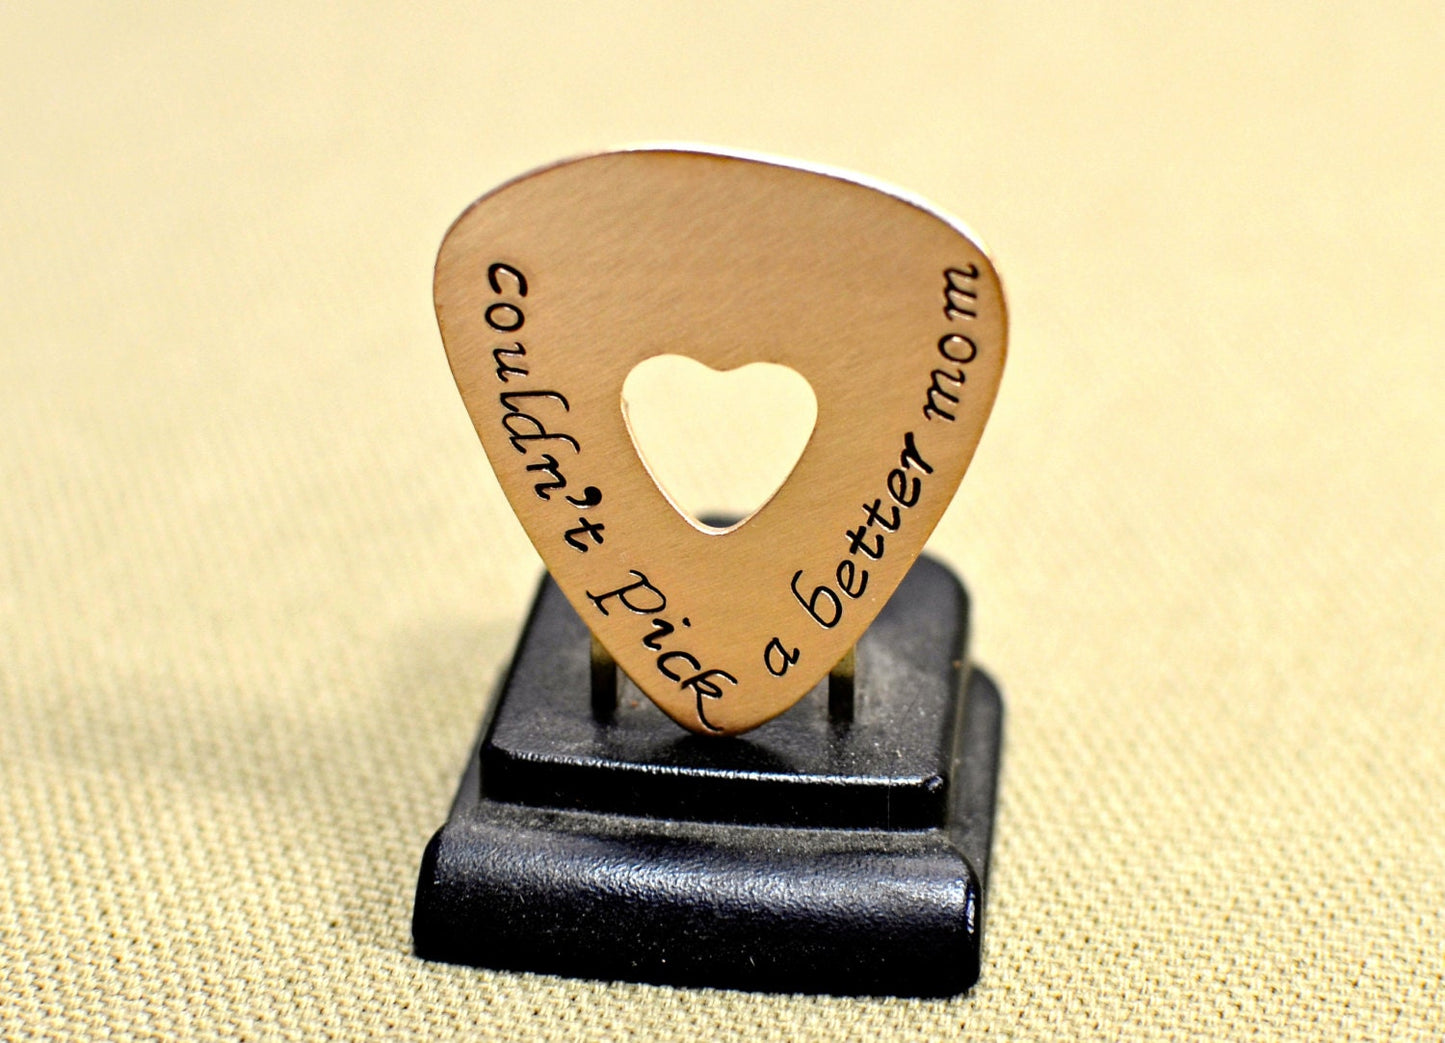 Couldn't pick a better mom guitar pick in bronze